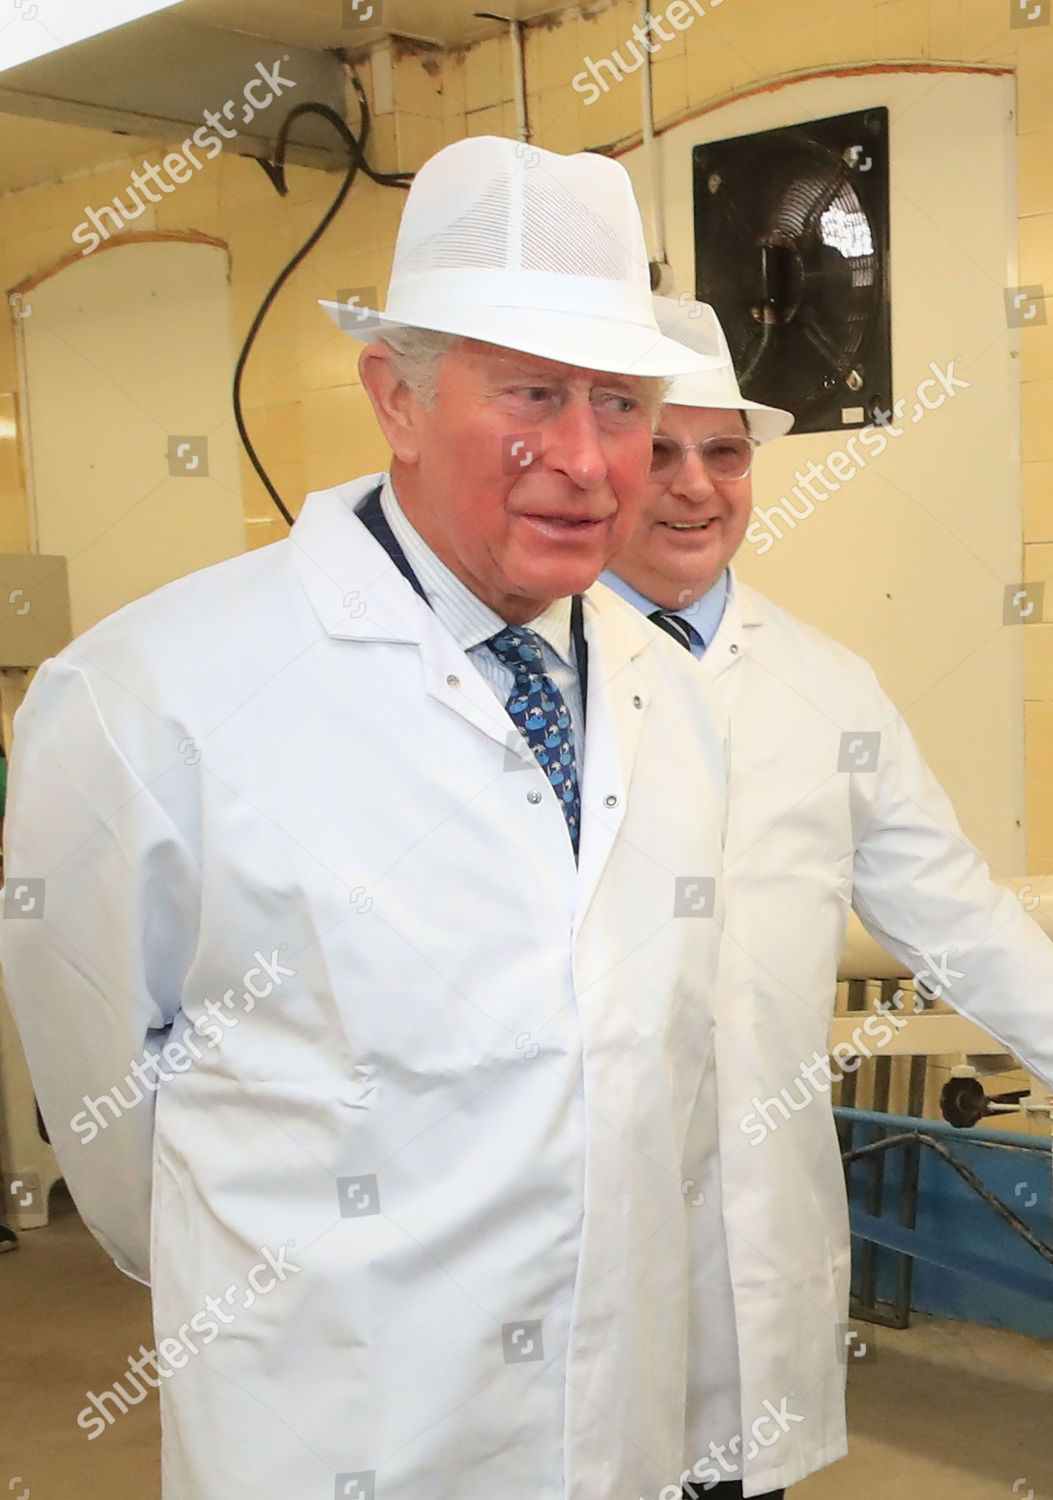 prince-charles-visit-to-greater-manchester-uk-shutterstock-editorial-10185724h.jpg